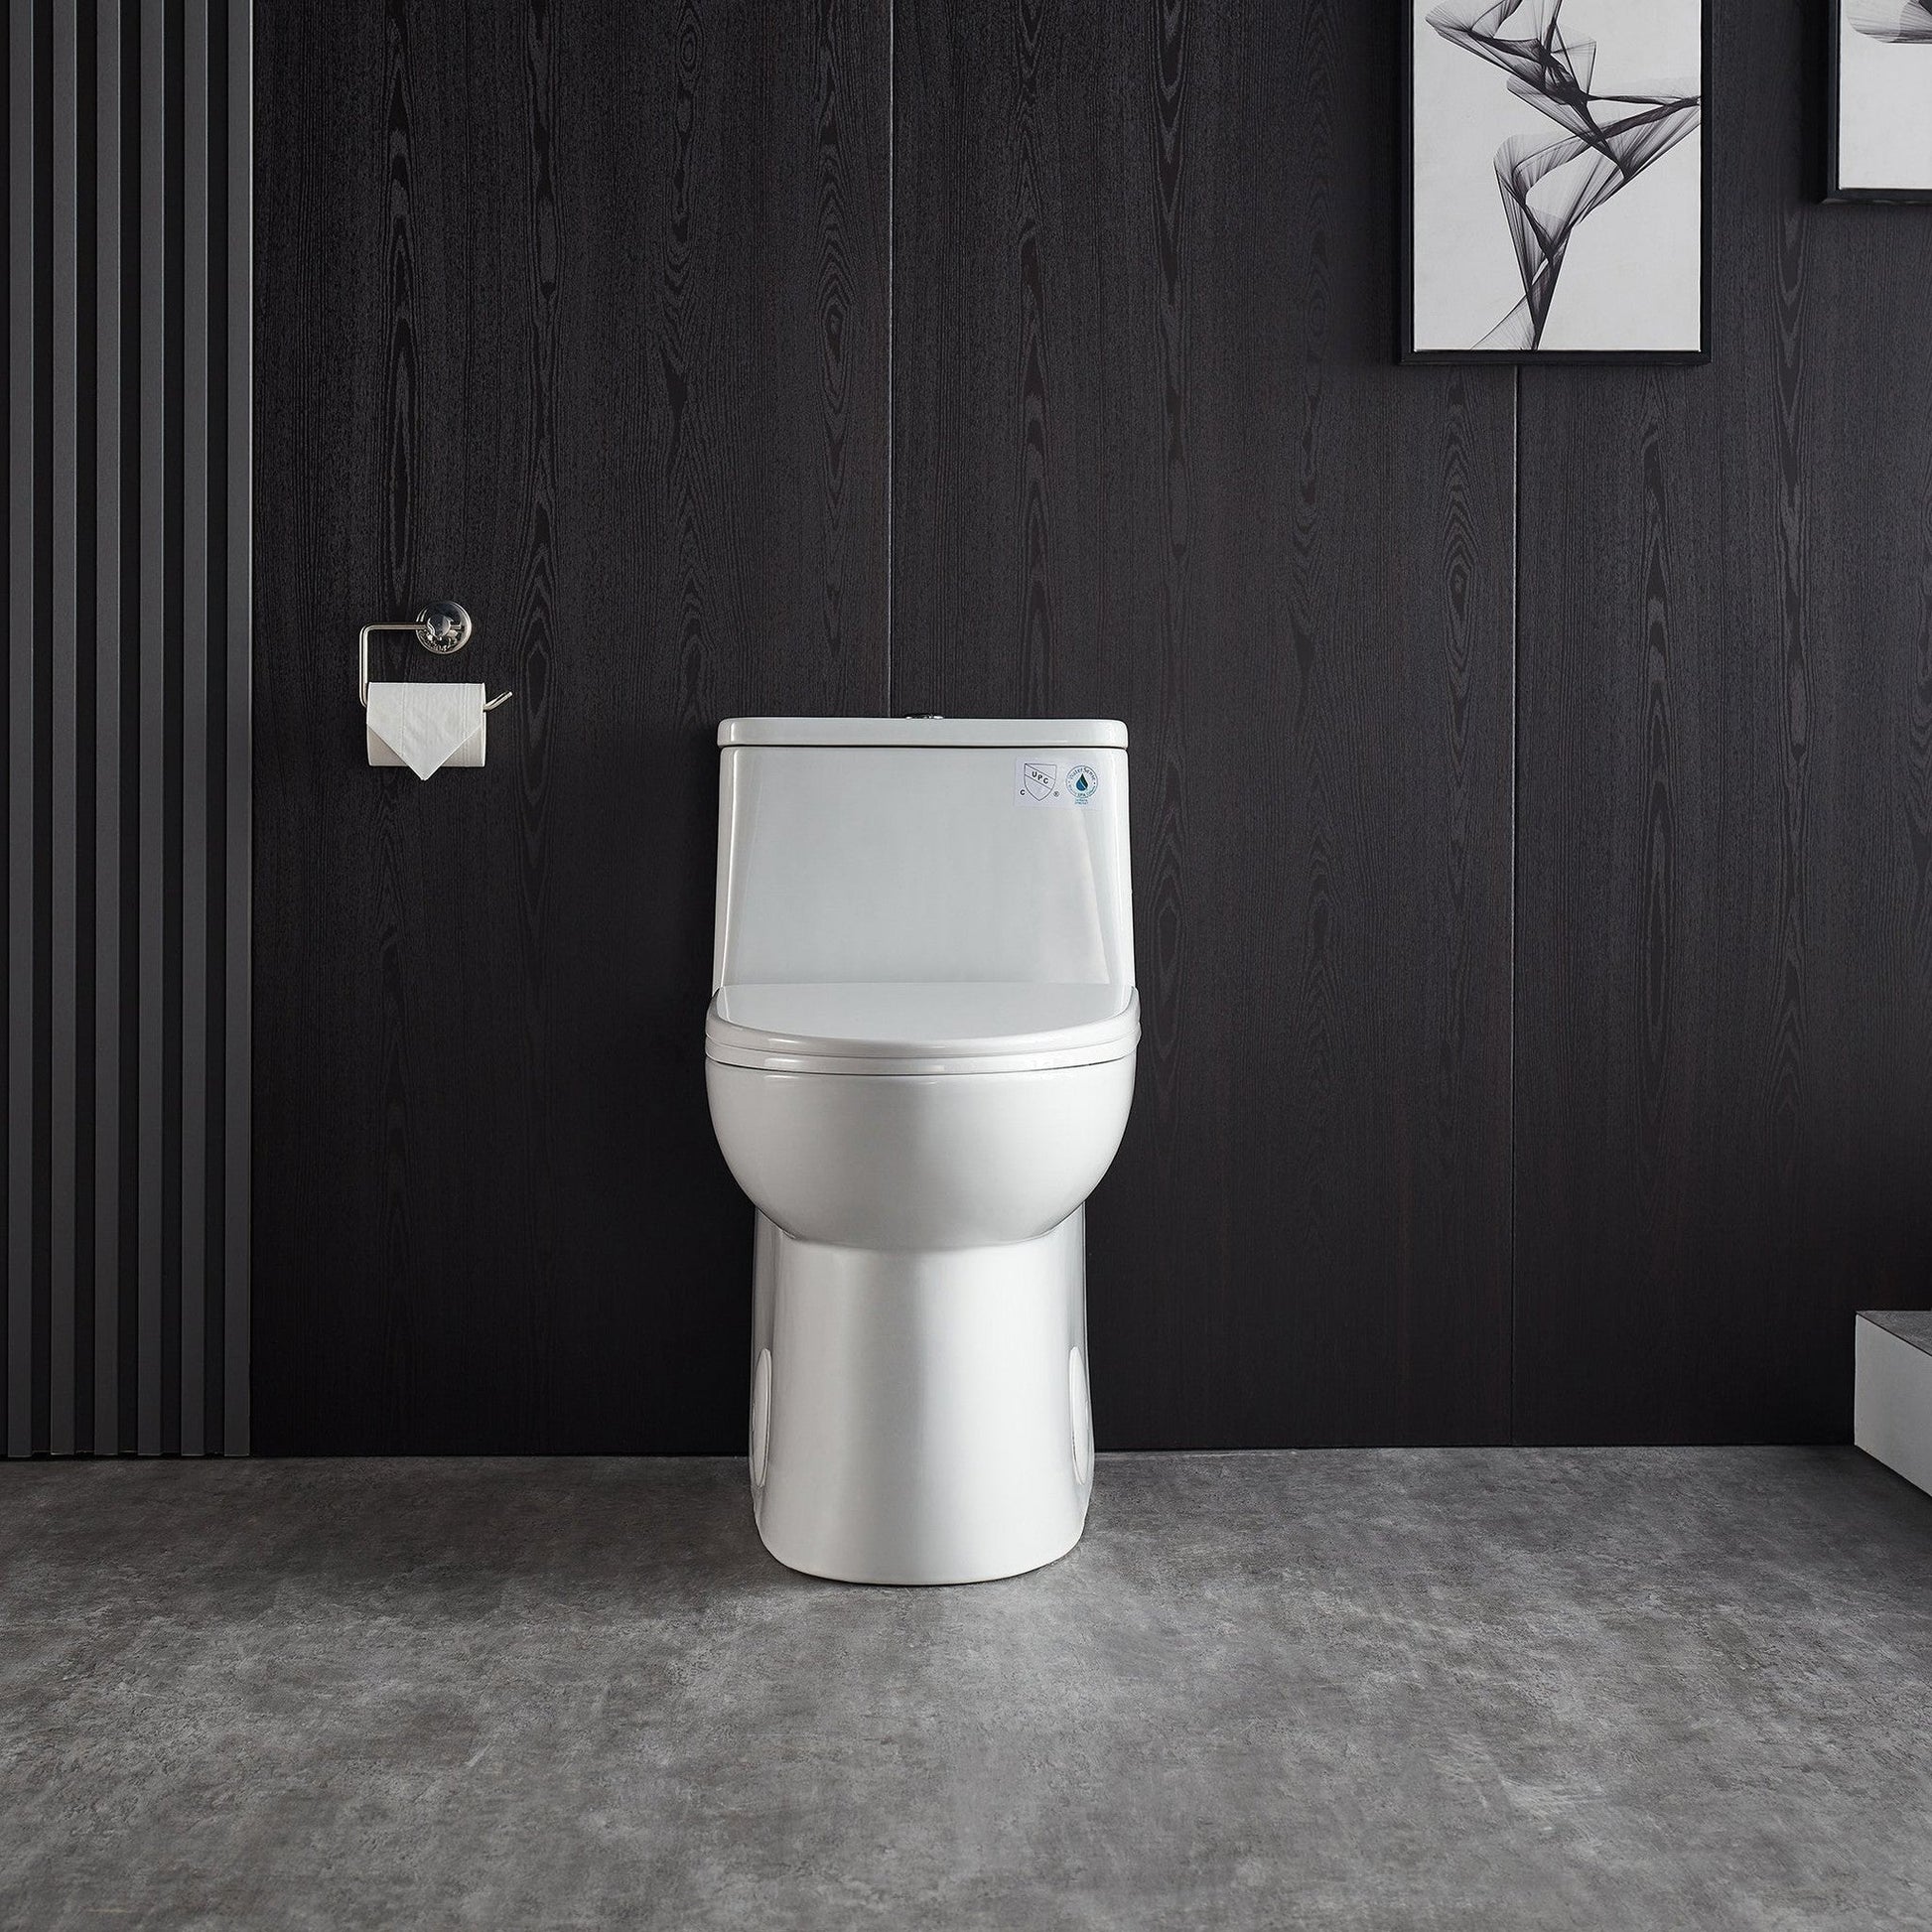 DeerValley Ursa Dual-Flush Full-Size Elongated White One-Piece Toilet With Soft Closing Seat